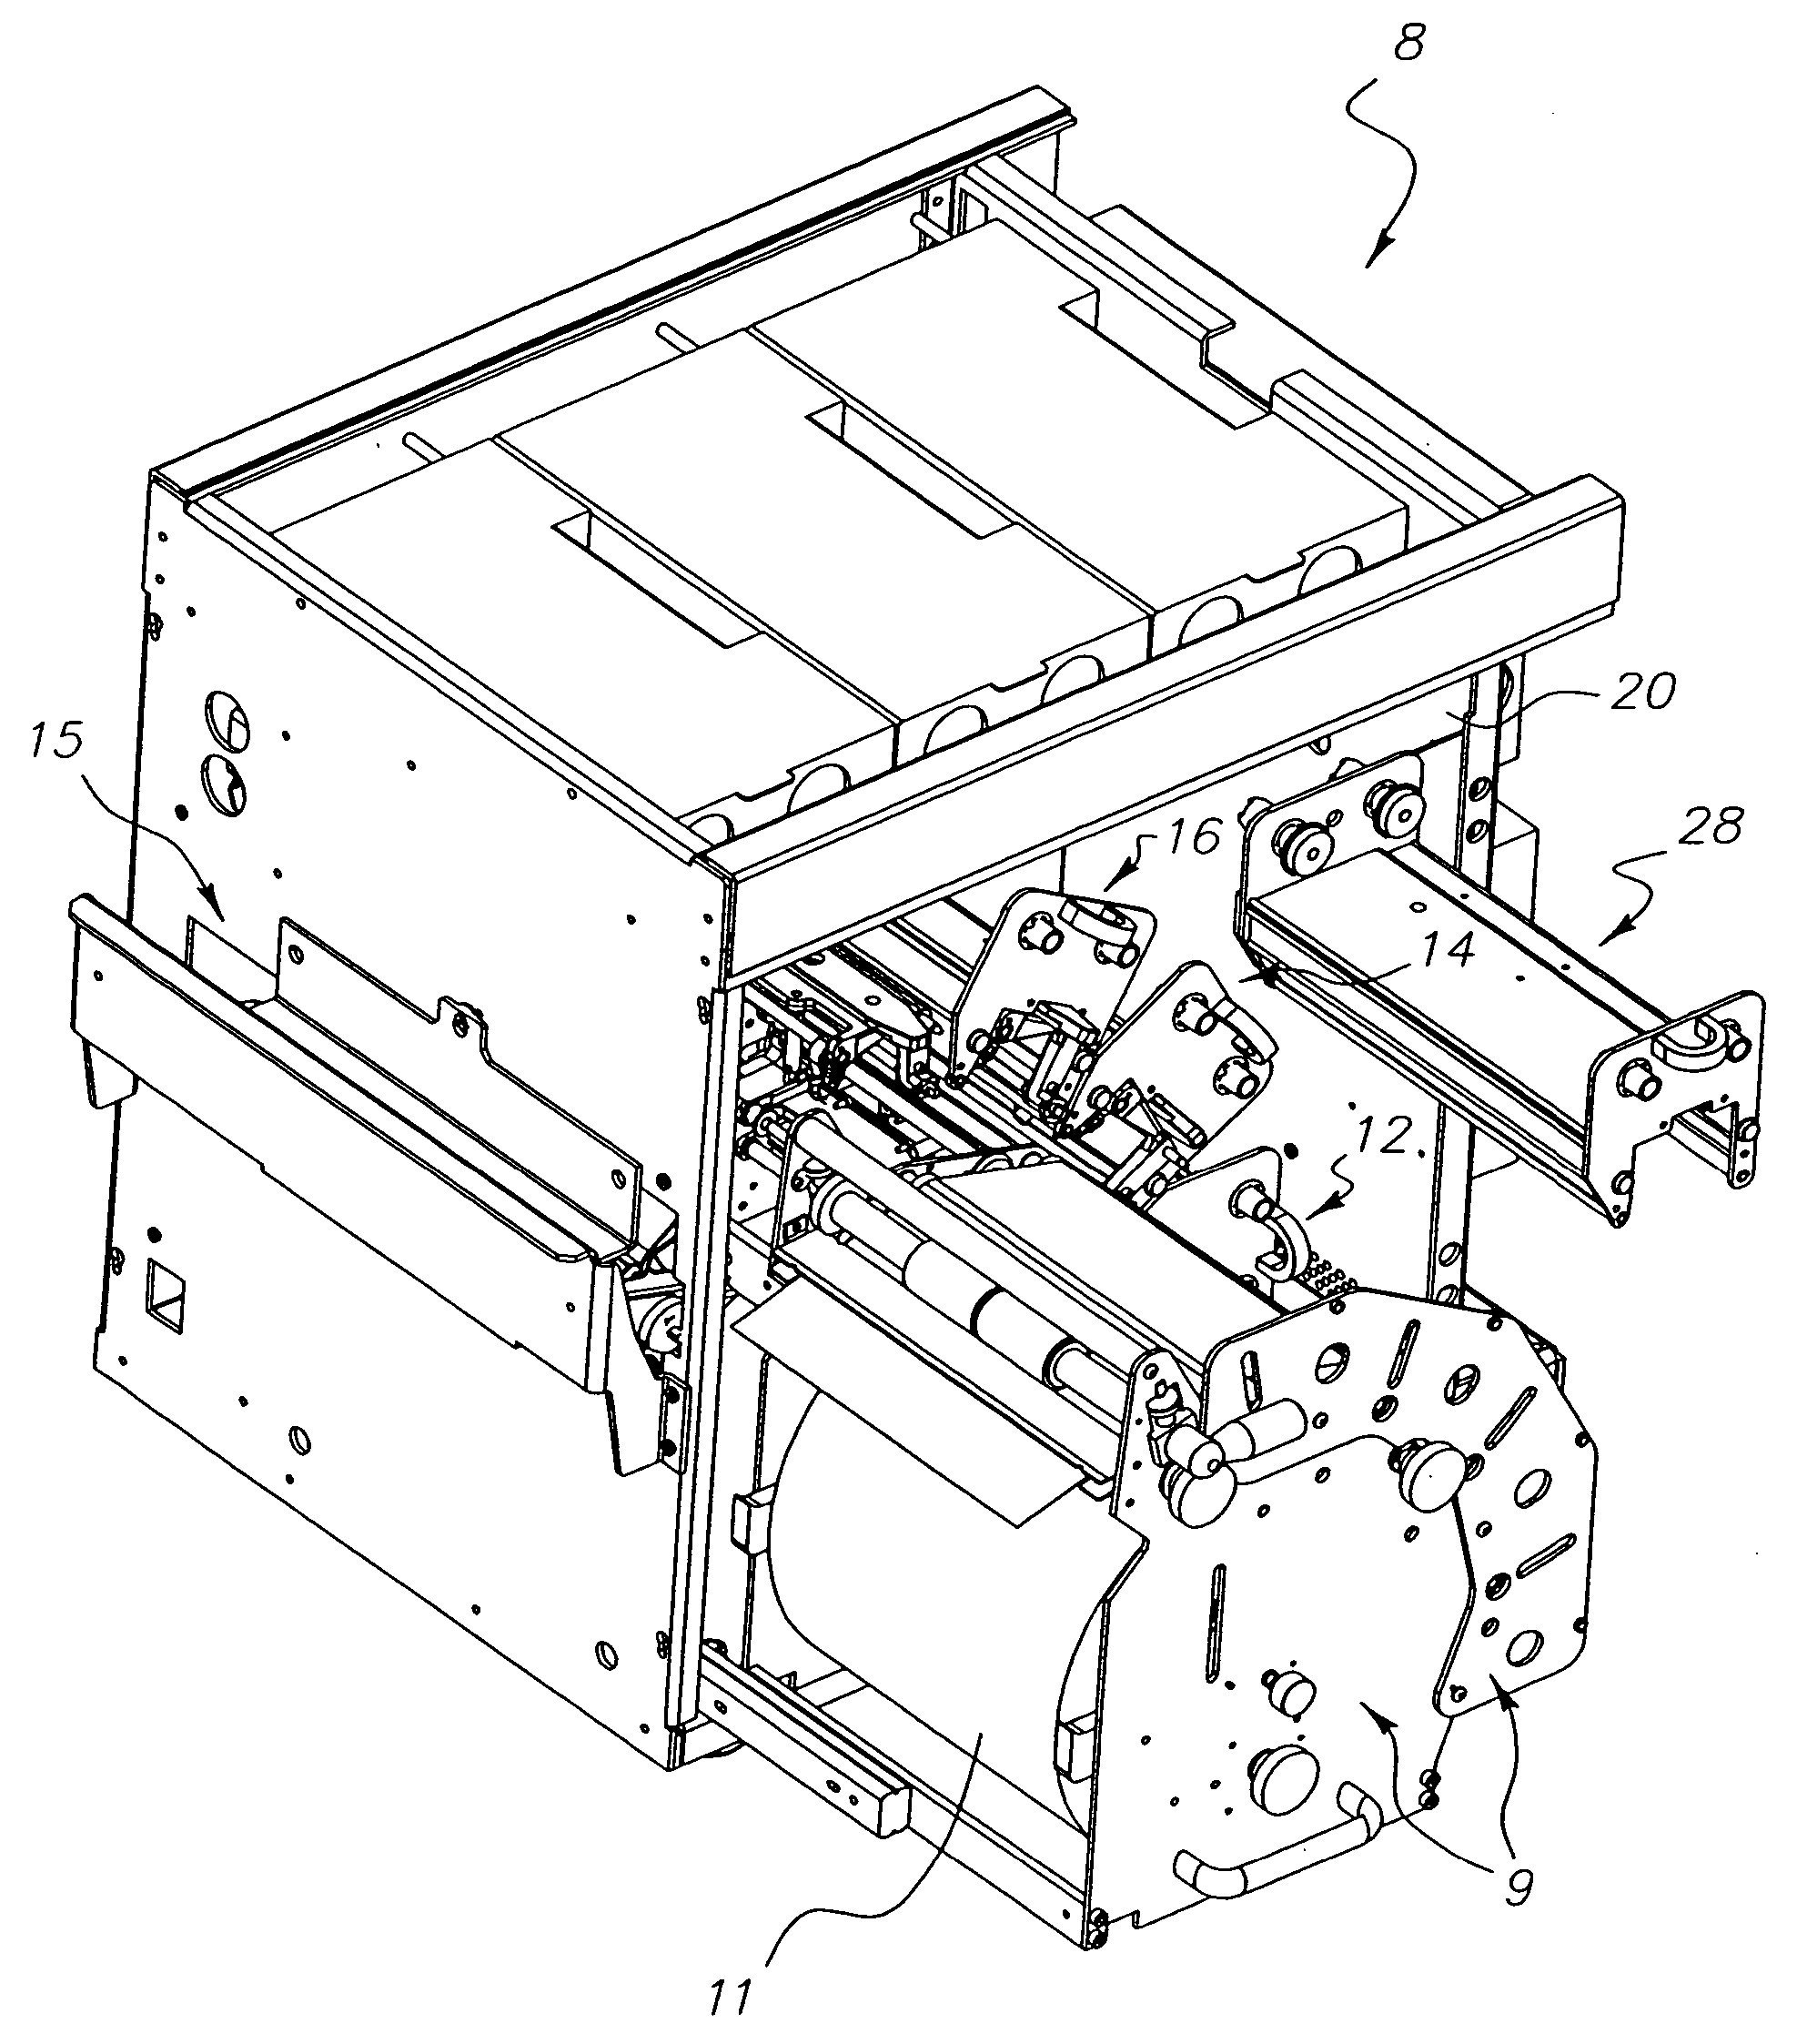 Method and apparatus for image registration improvements in a printer having plural printing stations